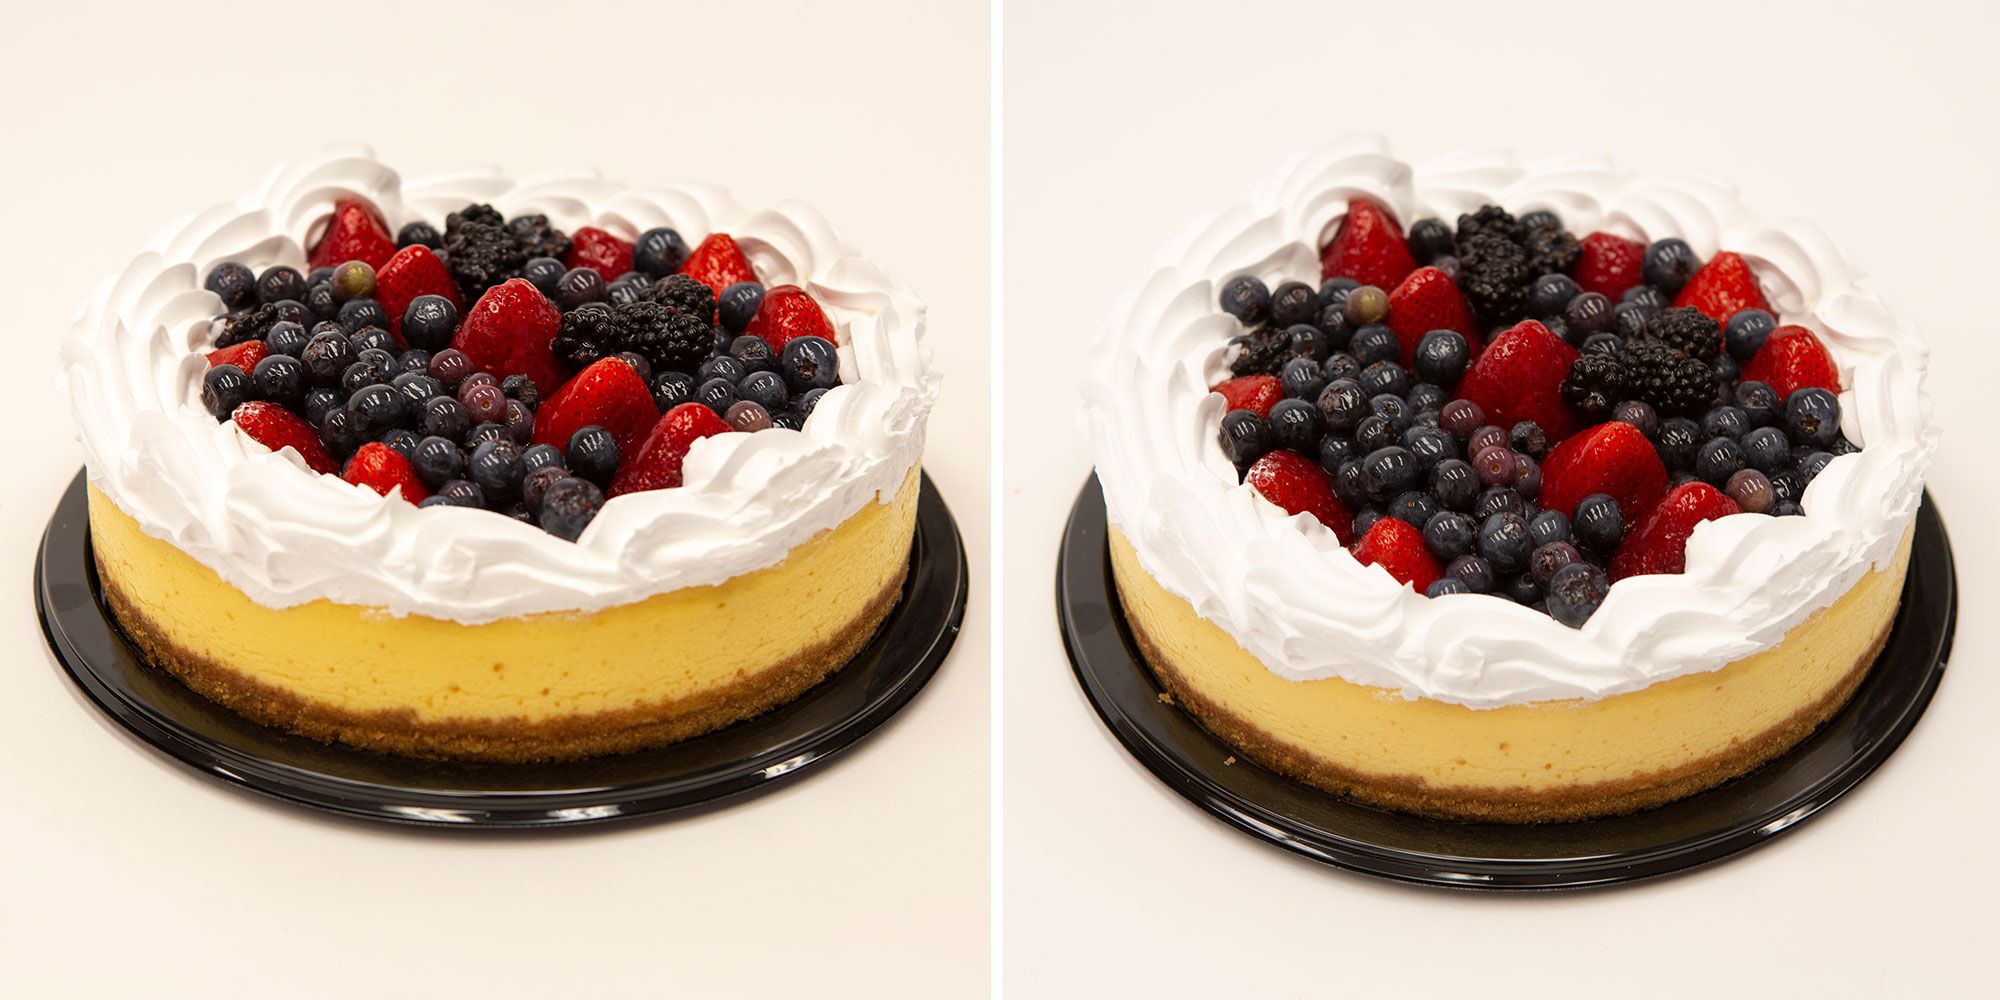 Sam's Club's Three-Pound Berry Cheesecake Is Perfect For Fourth of July